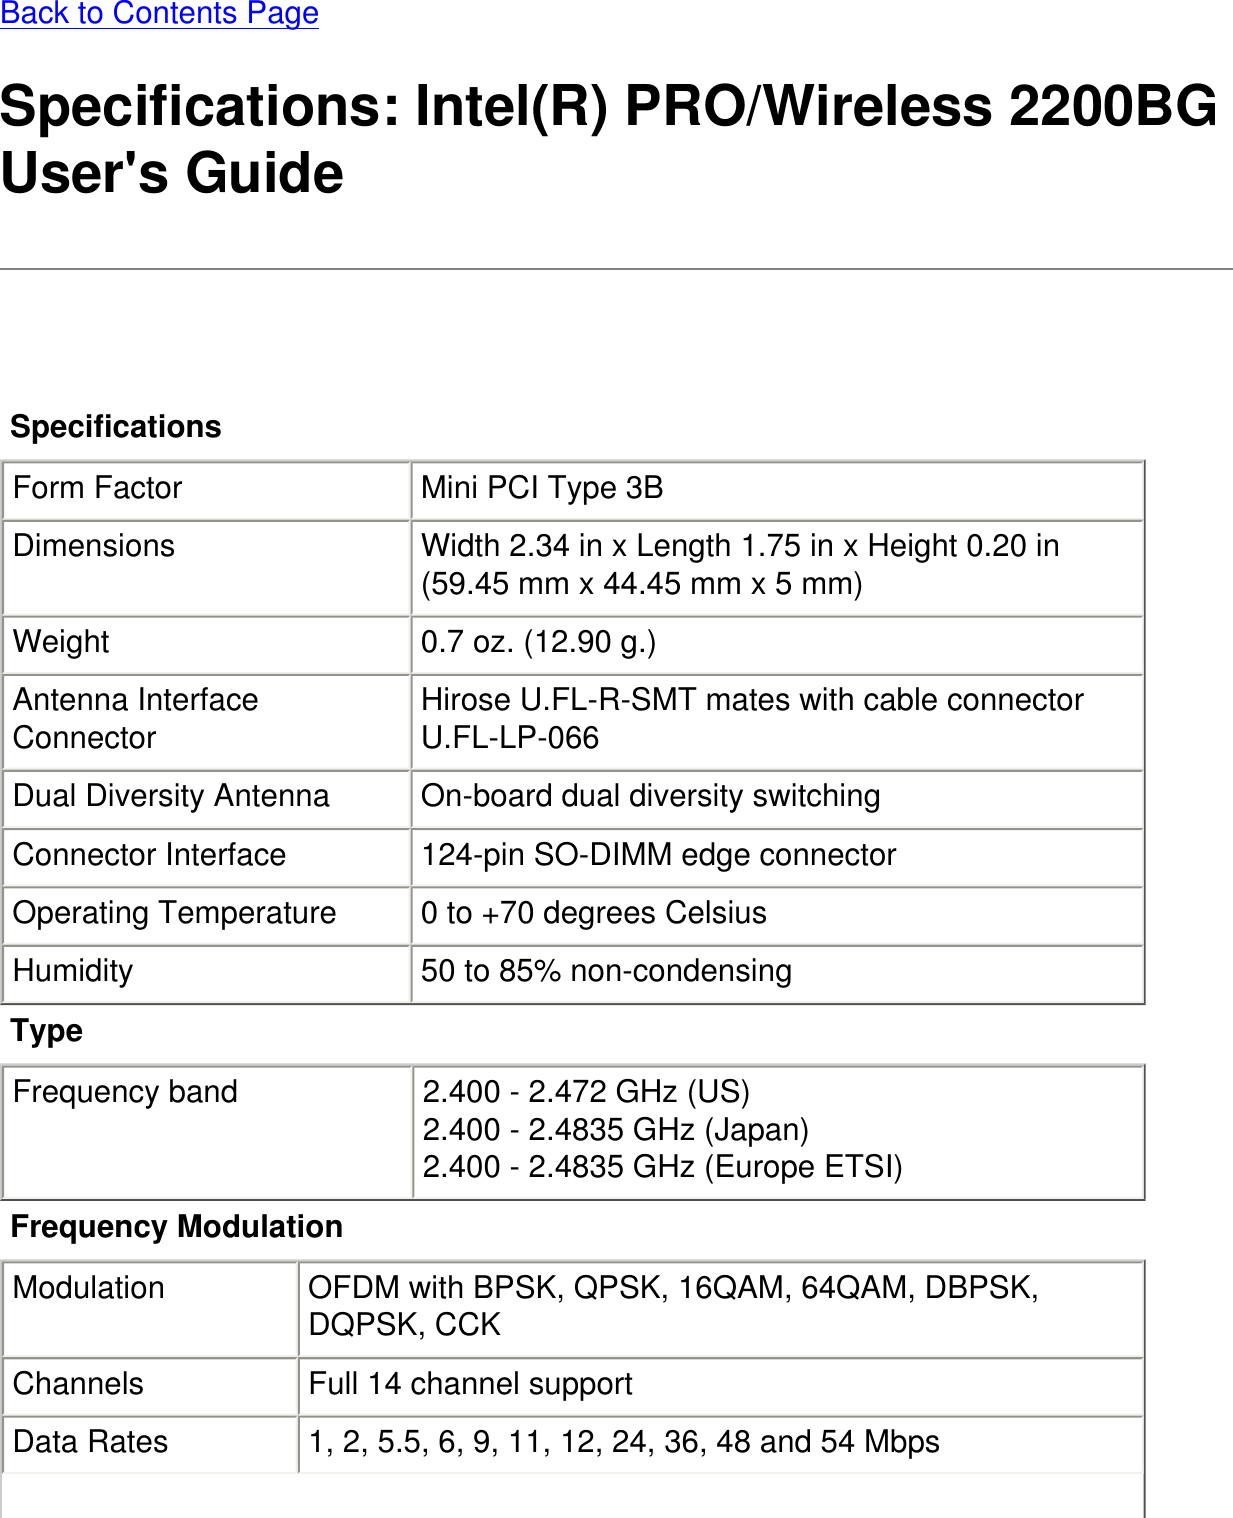 Back to Contents PageSpecifications: Intel(R) PRO/Wireless 2200BG User&apos;s Guide Specifications  Form Factor Mini PCI Type 3BDimensions Width 2.34 in x Length 1.75 in x Height 0.20 in (59.45 mm x 44.45 mm x 5 mm) Weight 0.7 oz. (12.90 g.) Antenna Interface Connector Hirose U.FL-R-SMT mates with cable connector U.FL-LP-066 Dual Diversity Antenna On-board dual diversity switching Connector Interface 124-pin SO-DIMM edge connector Operating Temperature 0 to +70 degrees Celsius Humidity 50 to 85% non-condensingType   Frequency band 2.400 - 2.472 GHz (US)2.400 - 2.4835 GHz (Japan)2.400 - 2.4835 GHz (Europe ETSI)Frequency Modulation   Modulation OFDM with BPSK, QPSK, 16QAM, 64QAM, DBPSK, DQPSK, CCKChannels Full 14 channel supportData Rates 1, 2, 5.5, 6, 9, 11, 12, 24, 36, 48 and 54 Mbps